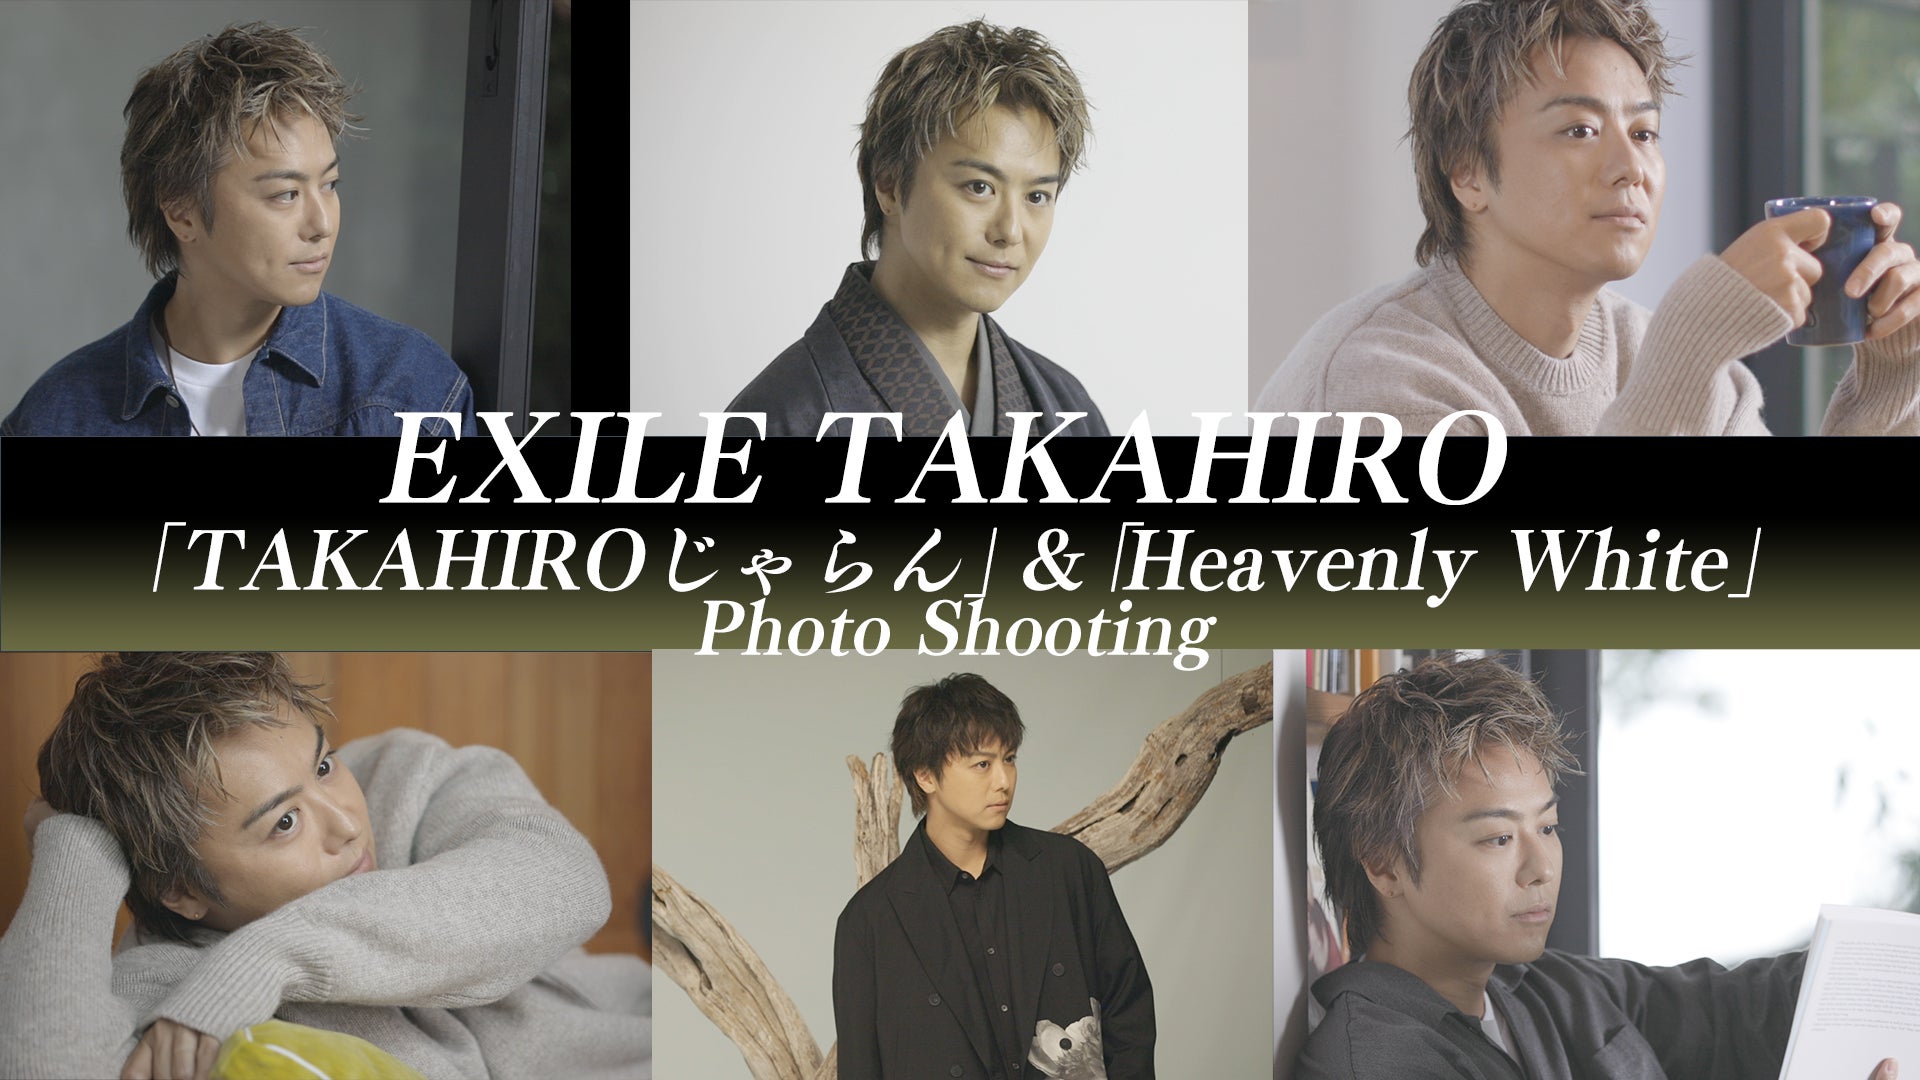 EXILE TAKAHIRO「TAKAHIROじゃらん」スチール撮影 ＆「Heavenly  White」アー写撮影に密着！2021/1/23(土)EXILE/EXILE THE SECOND